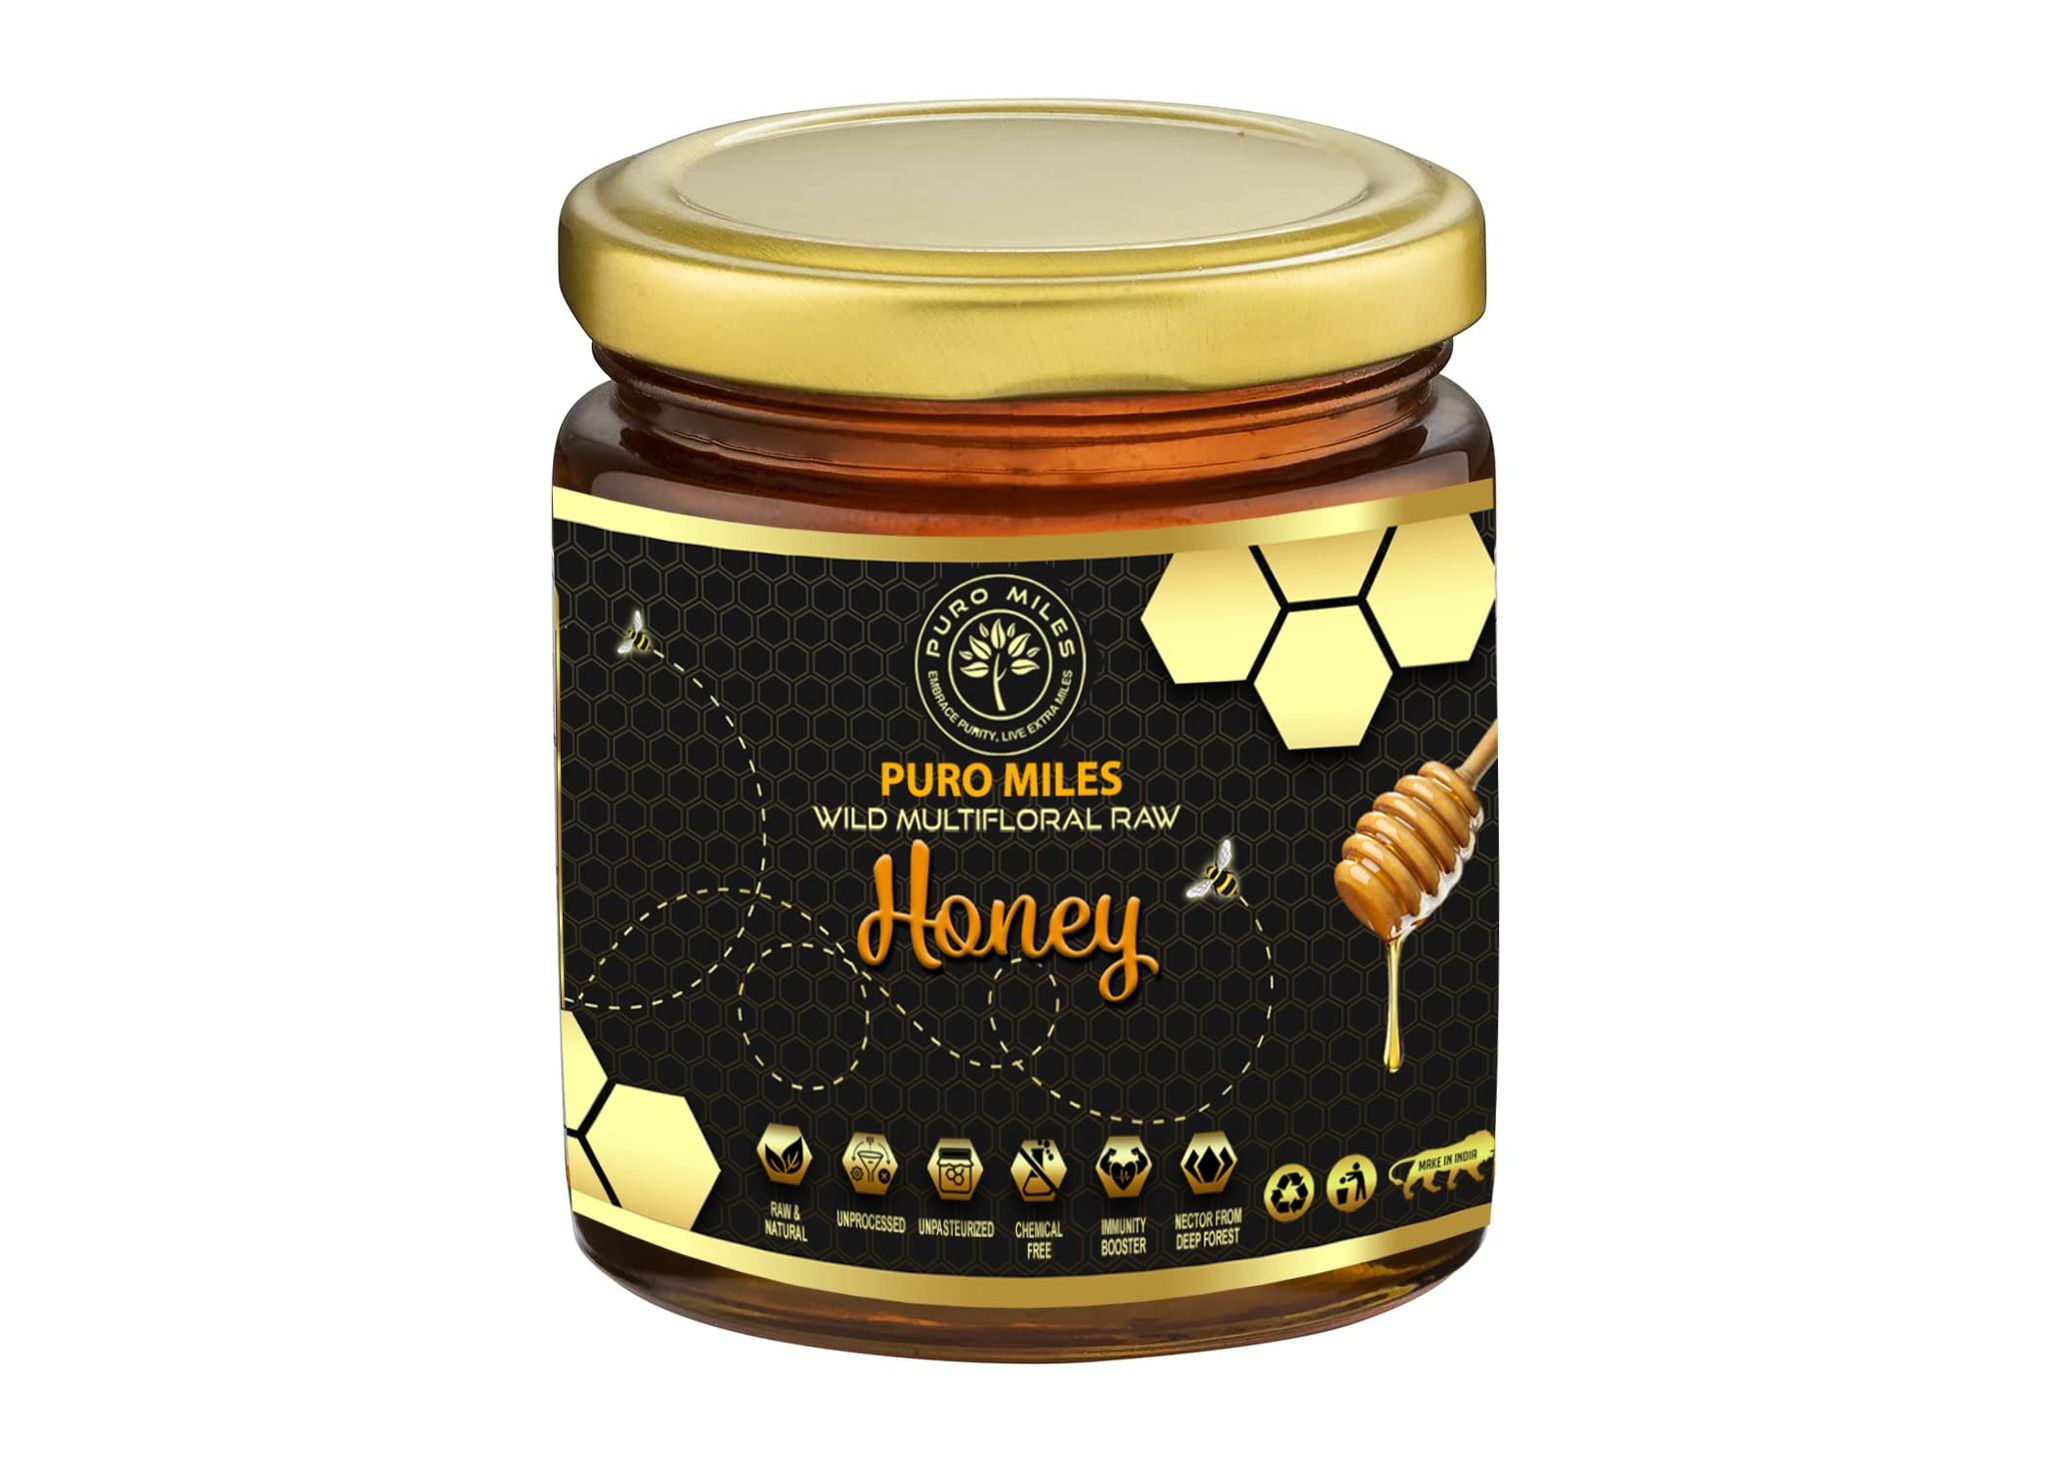 Puro Miles Raw Honey -250gm Glass Jar| Organic, Natural & Pure | Unprocessed & Unpasteurized | Sourced from Wild Himalayan Forests by Authentic Beekeepers | Processed by Bees Delivered by us